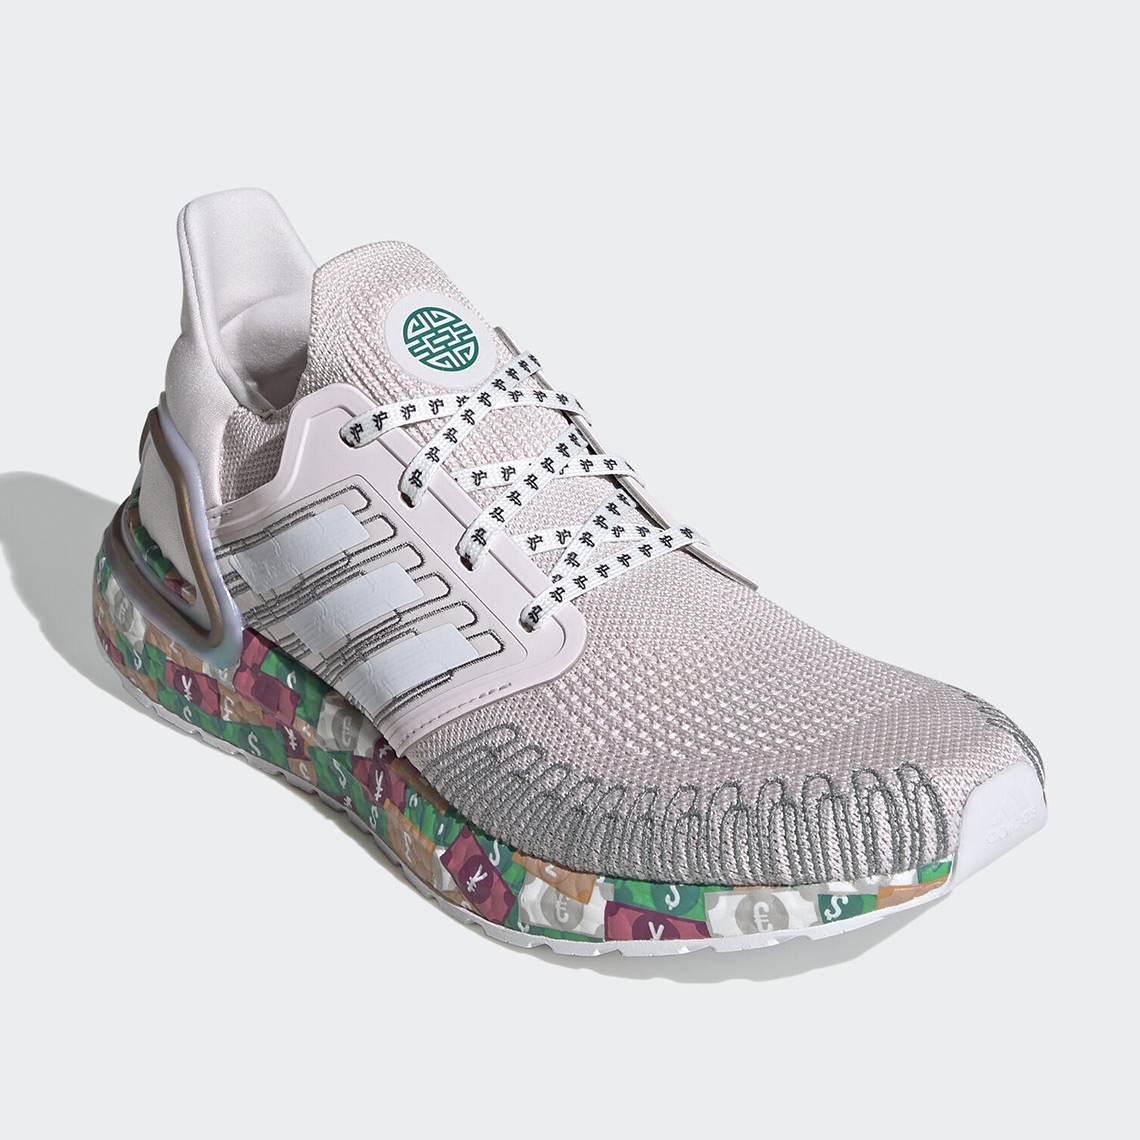 Adidas Ultra Boost 20 Global Currency Fx8890 2